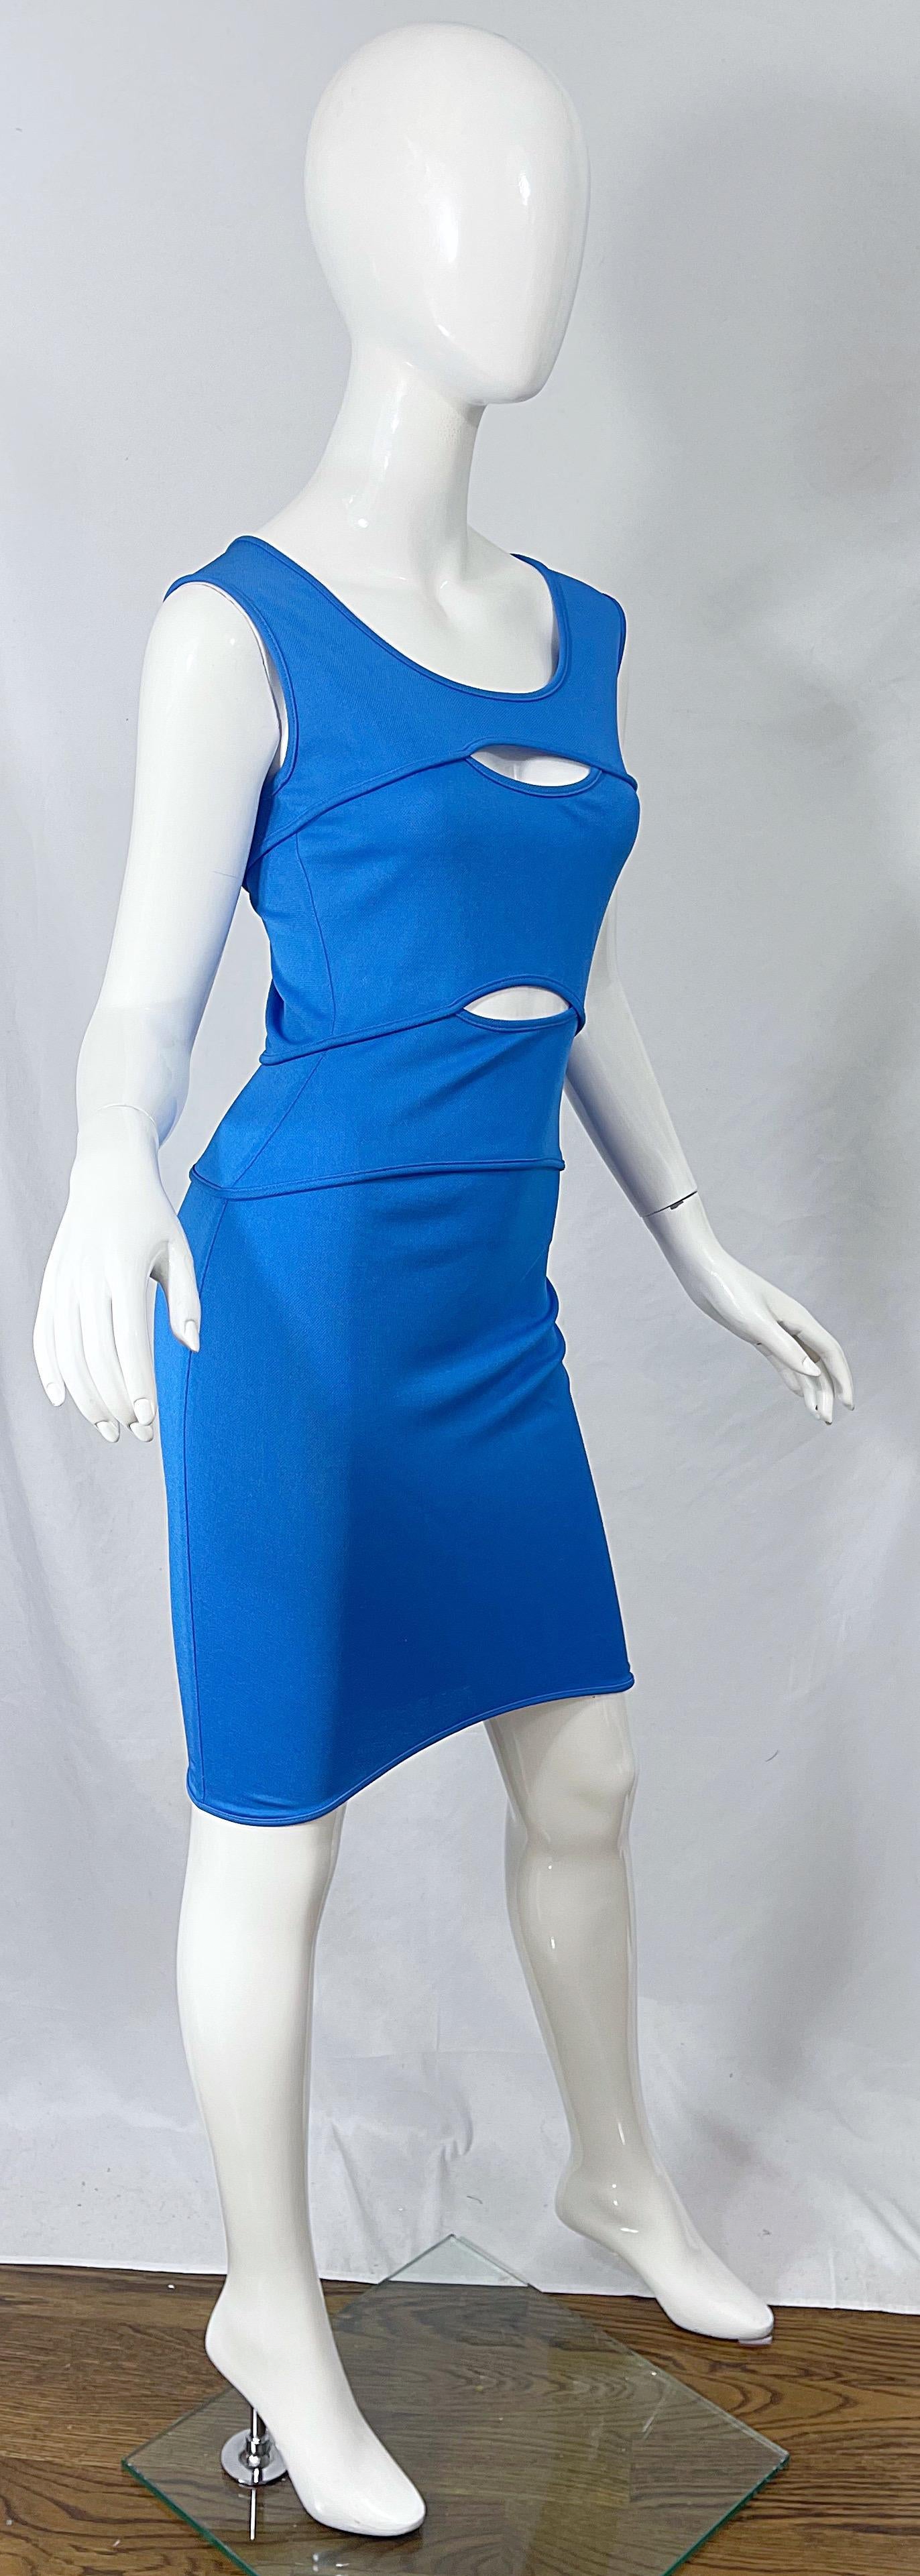 Thierry Mugler 1980s Blue Cut Out Vintage Body Con 80s Dress Size 44 For Sale 3